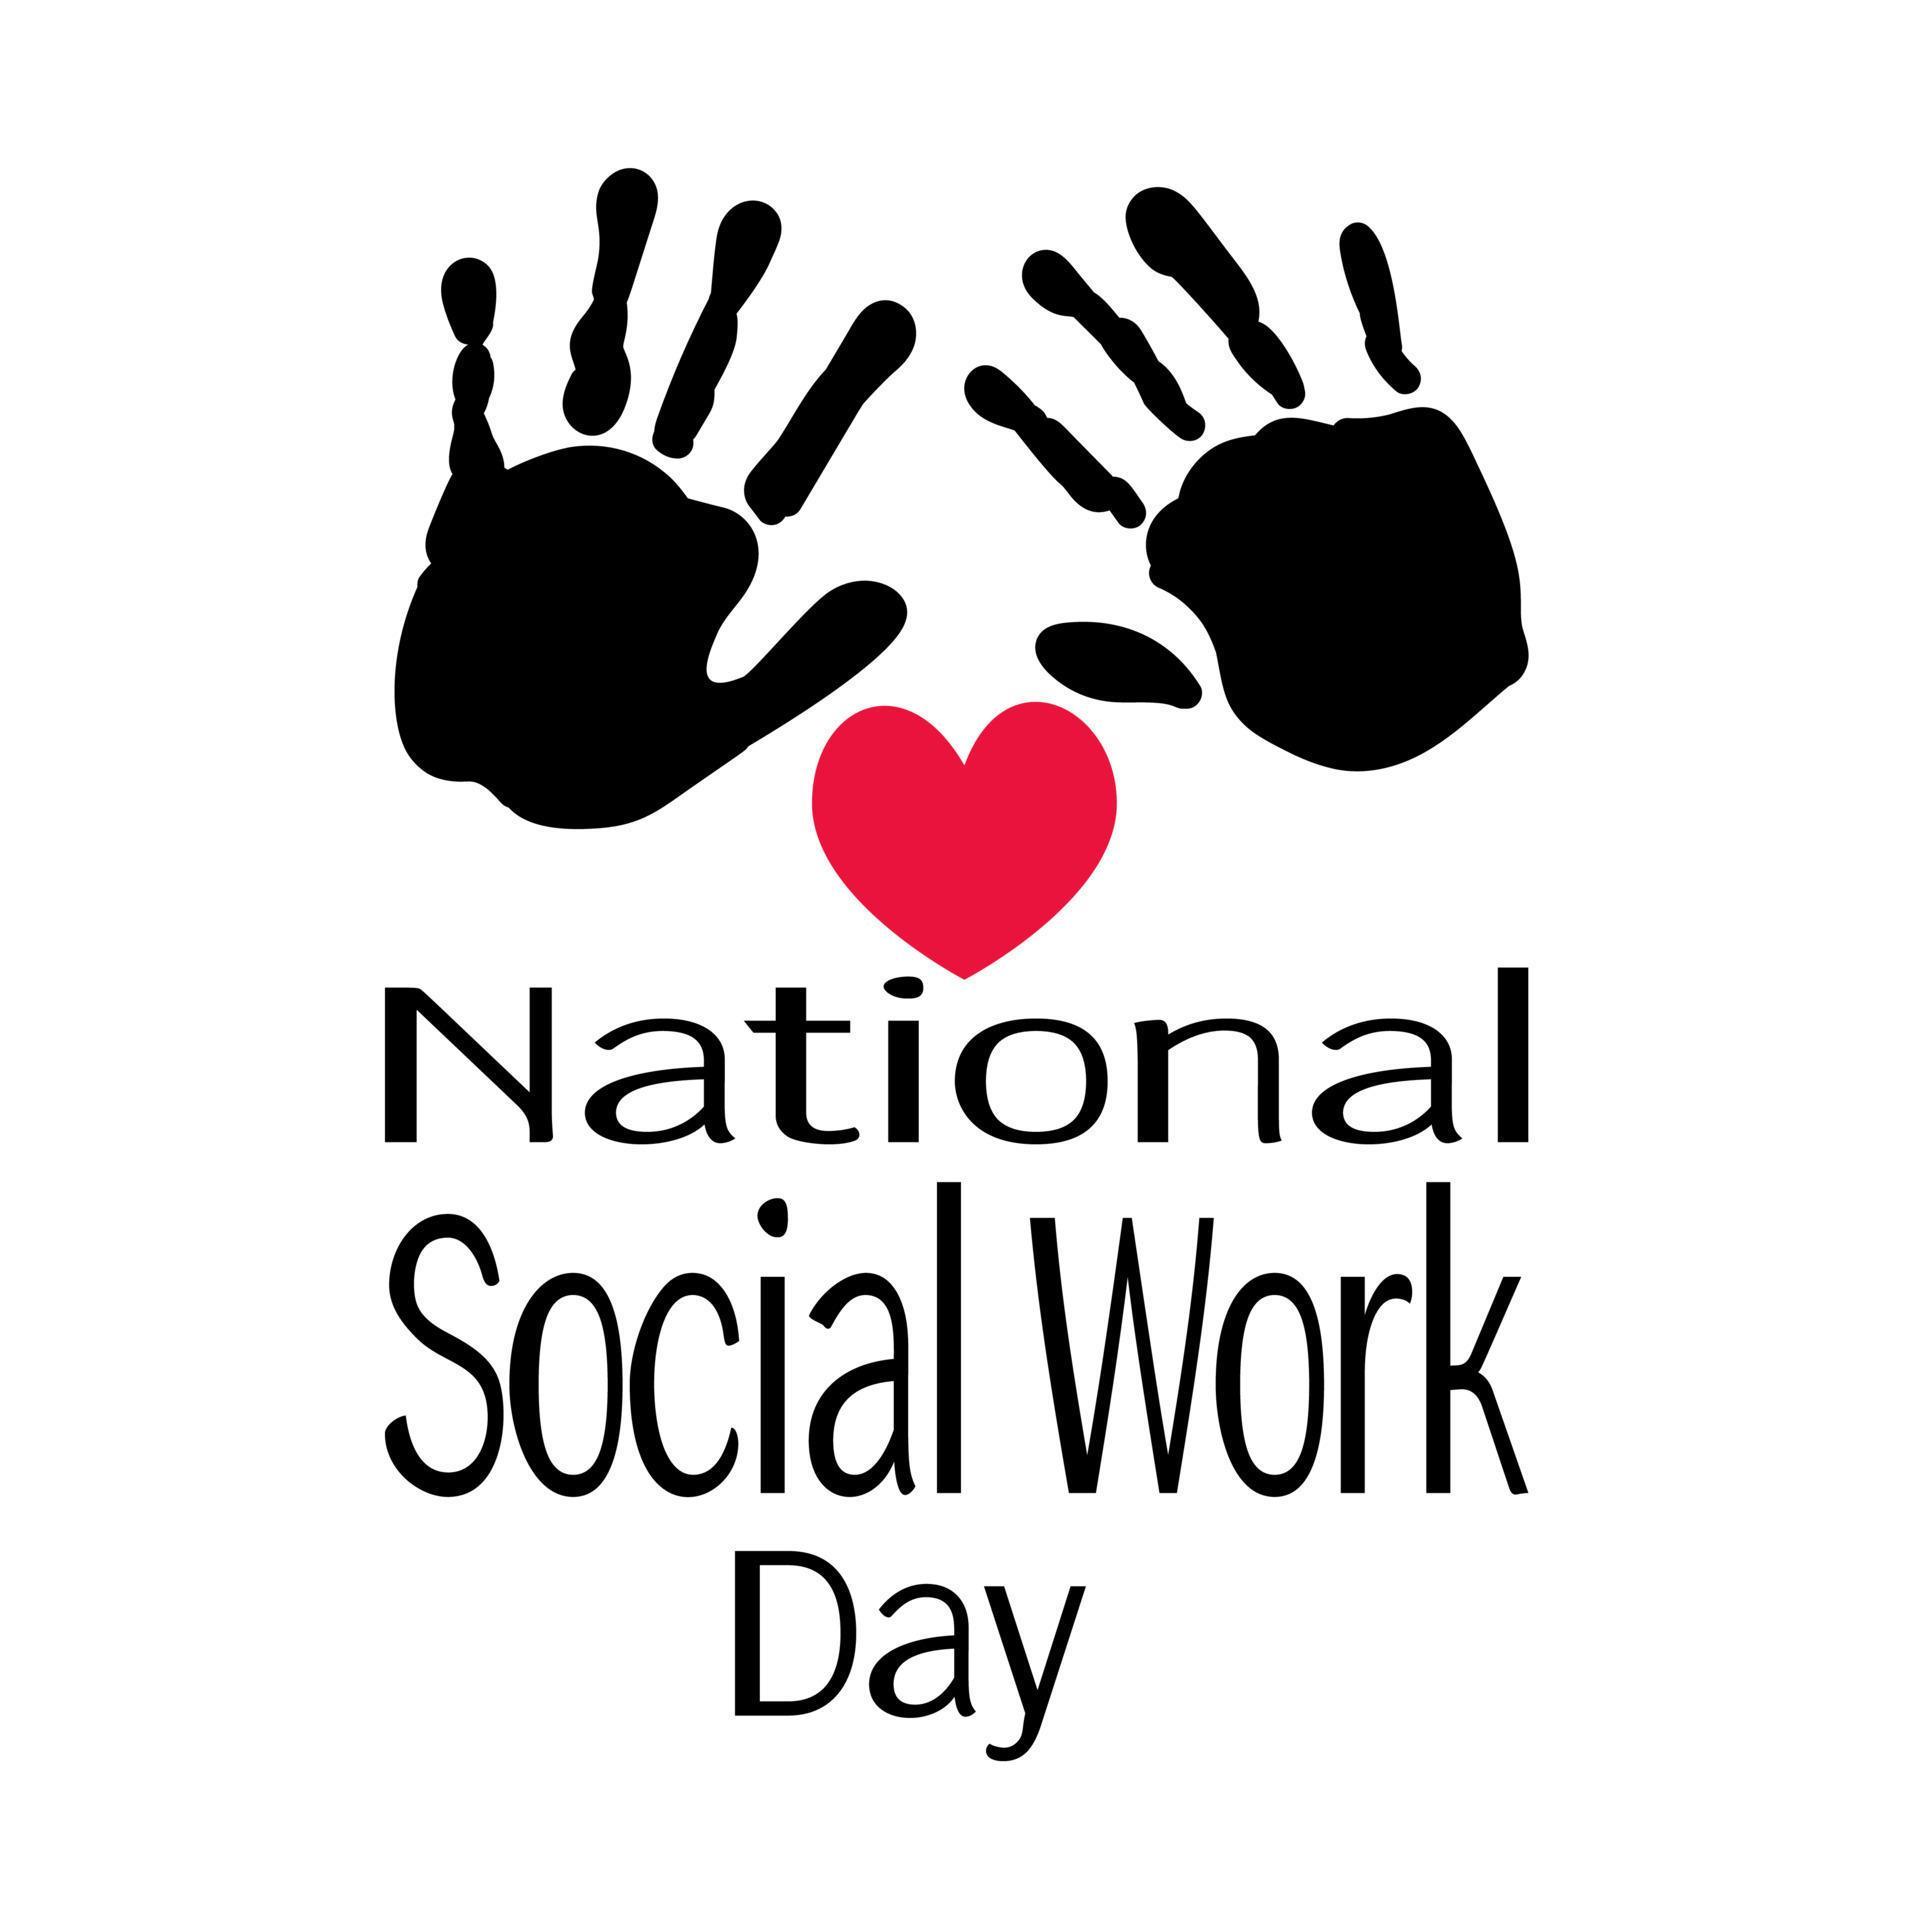 National Social Work Day, Symbolic handprints and red heart, for poster